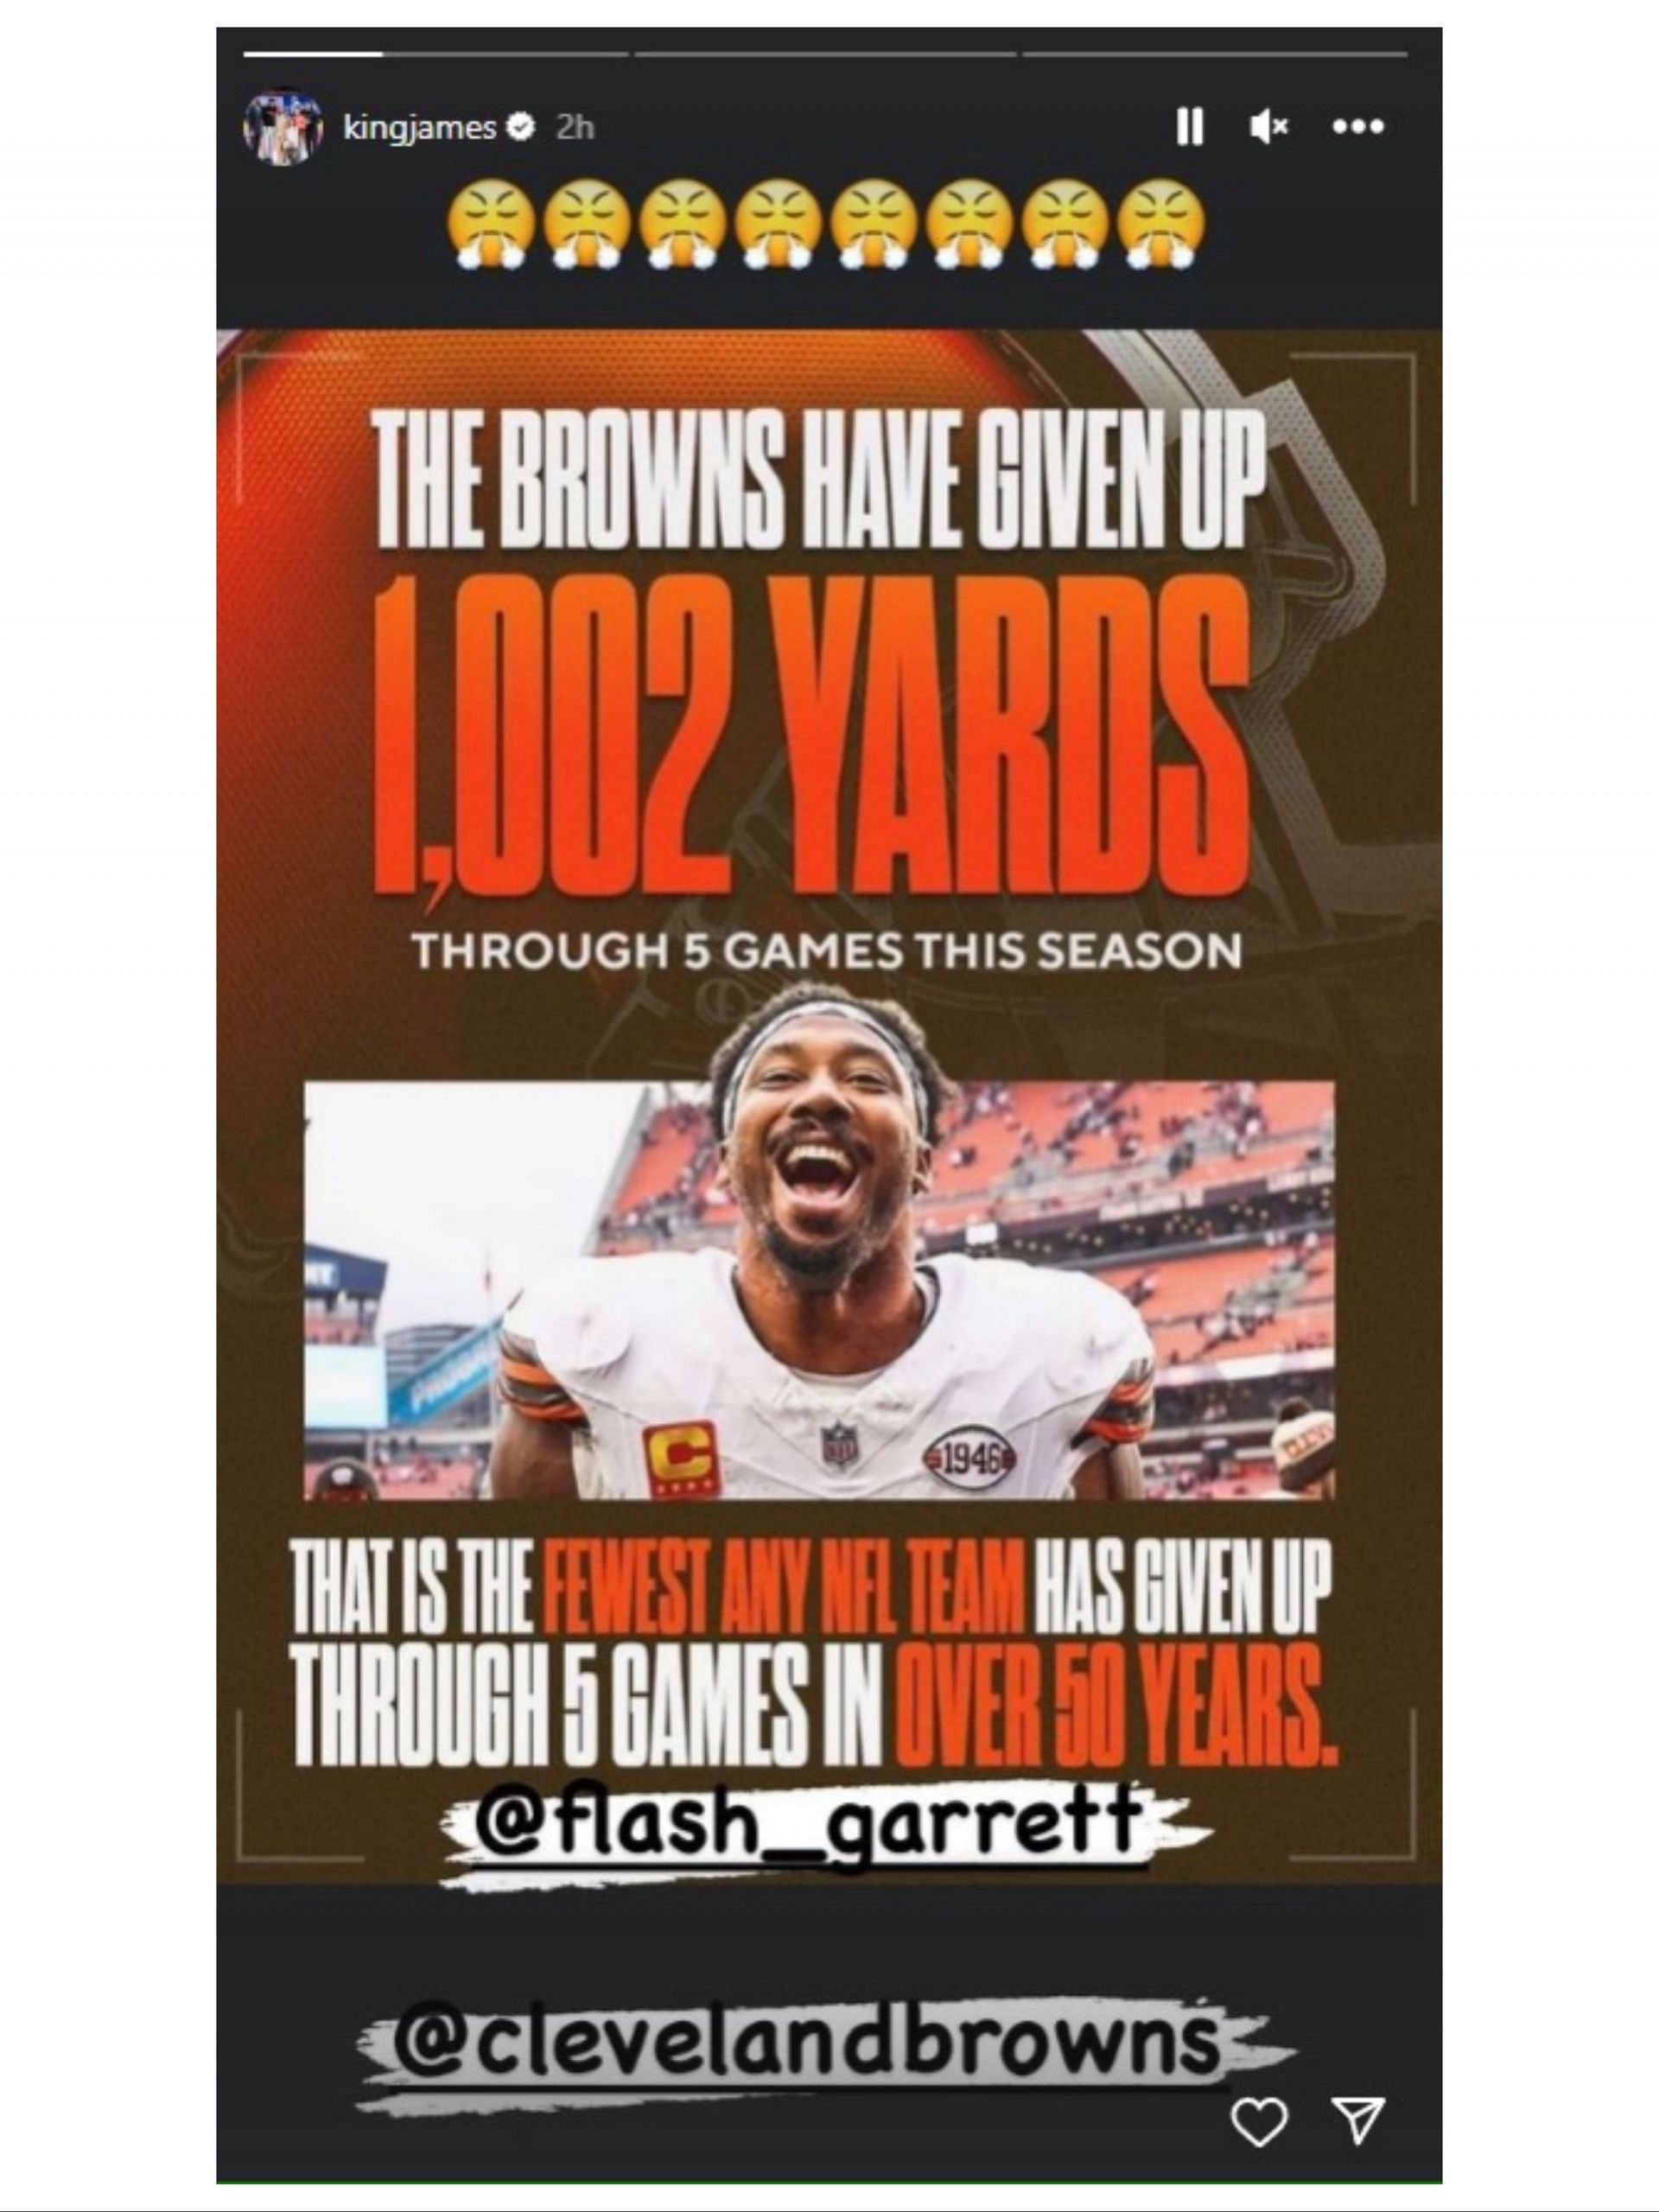 LeBron giving the Browns a shout out on Instagram